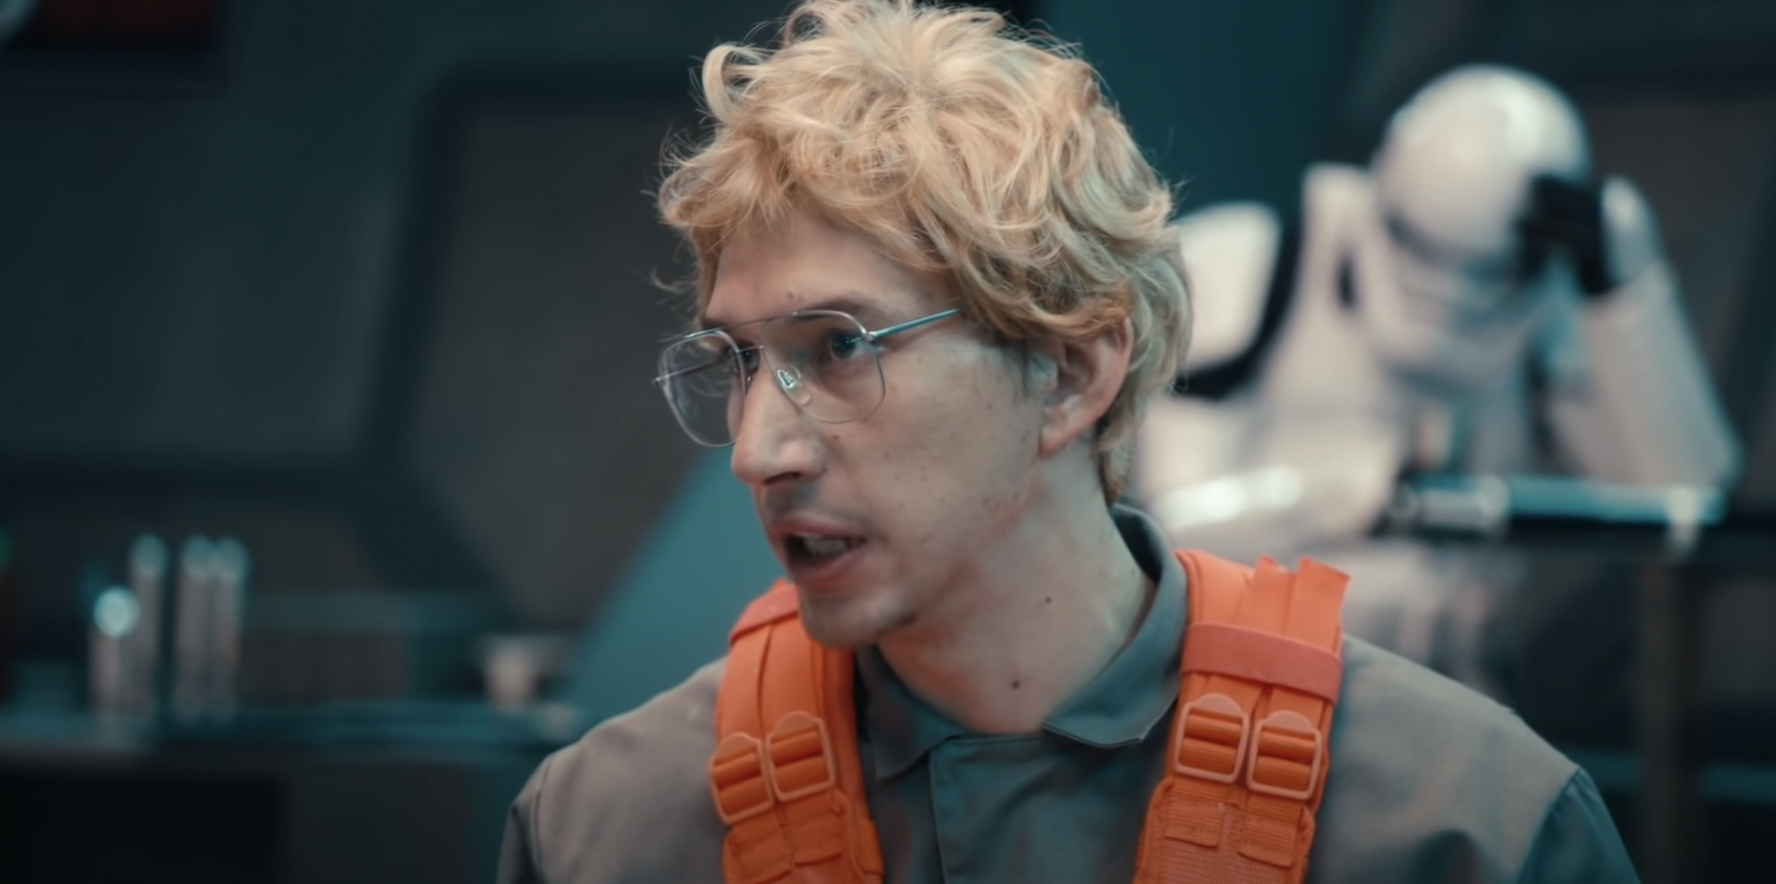 Adam Driver dressed in a wig and glasses